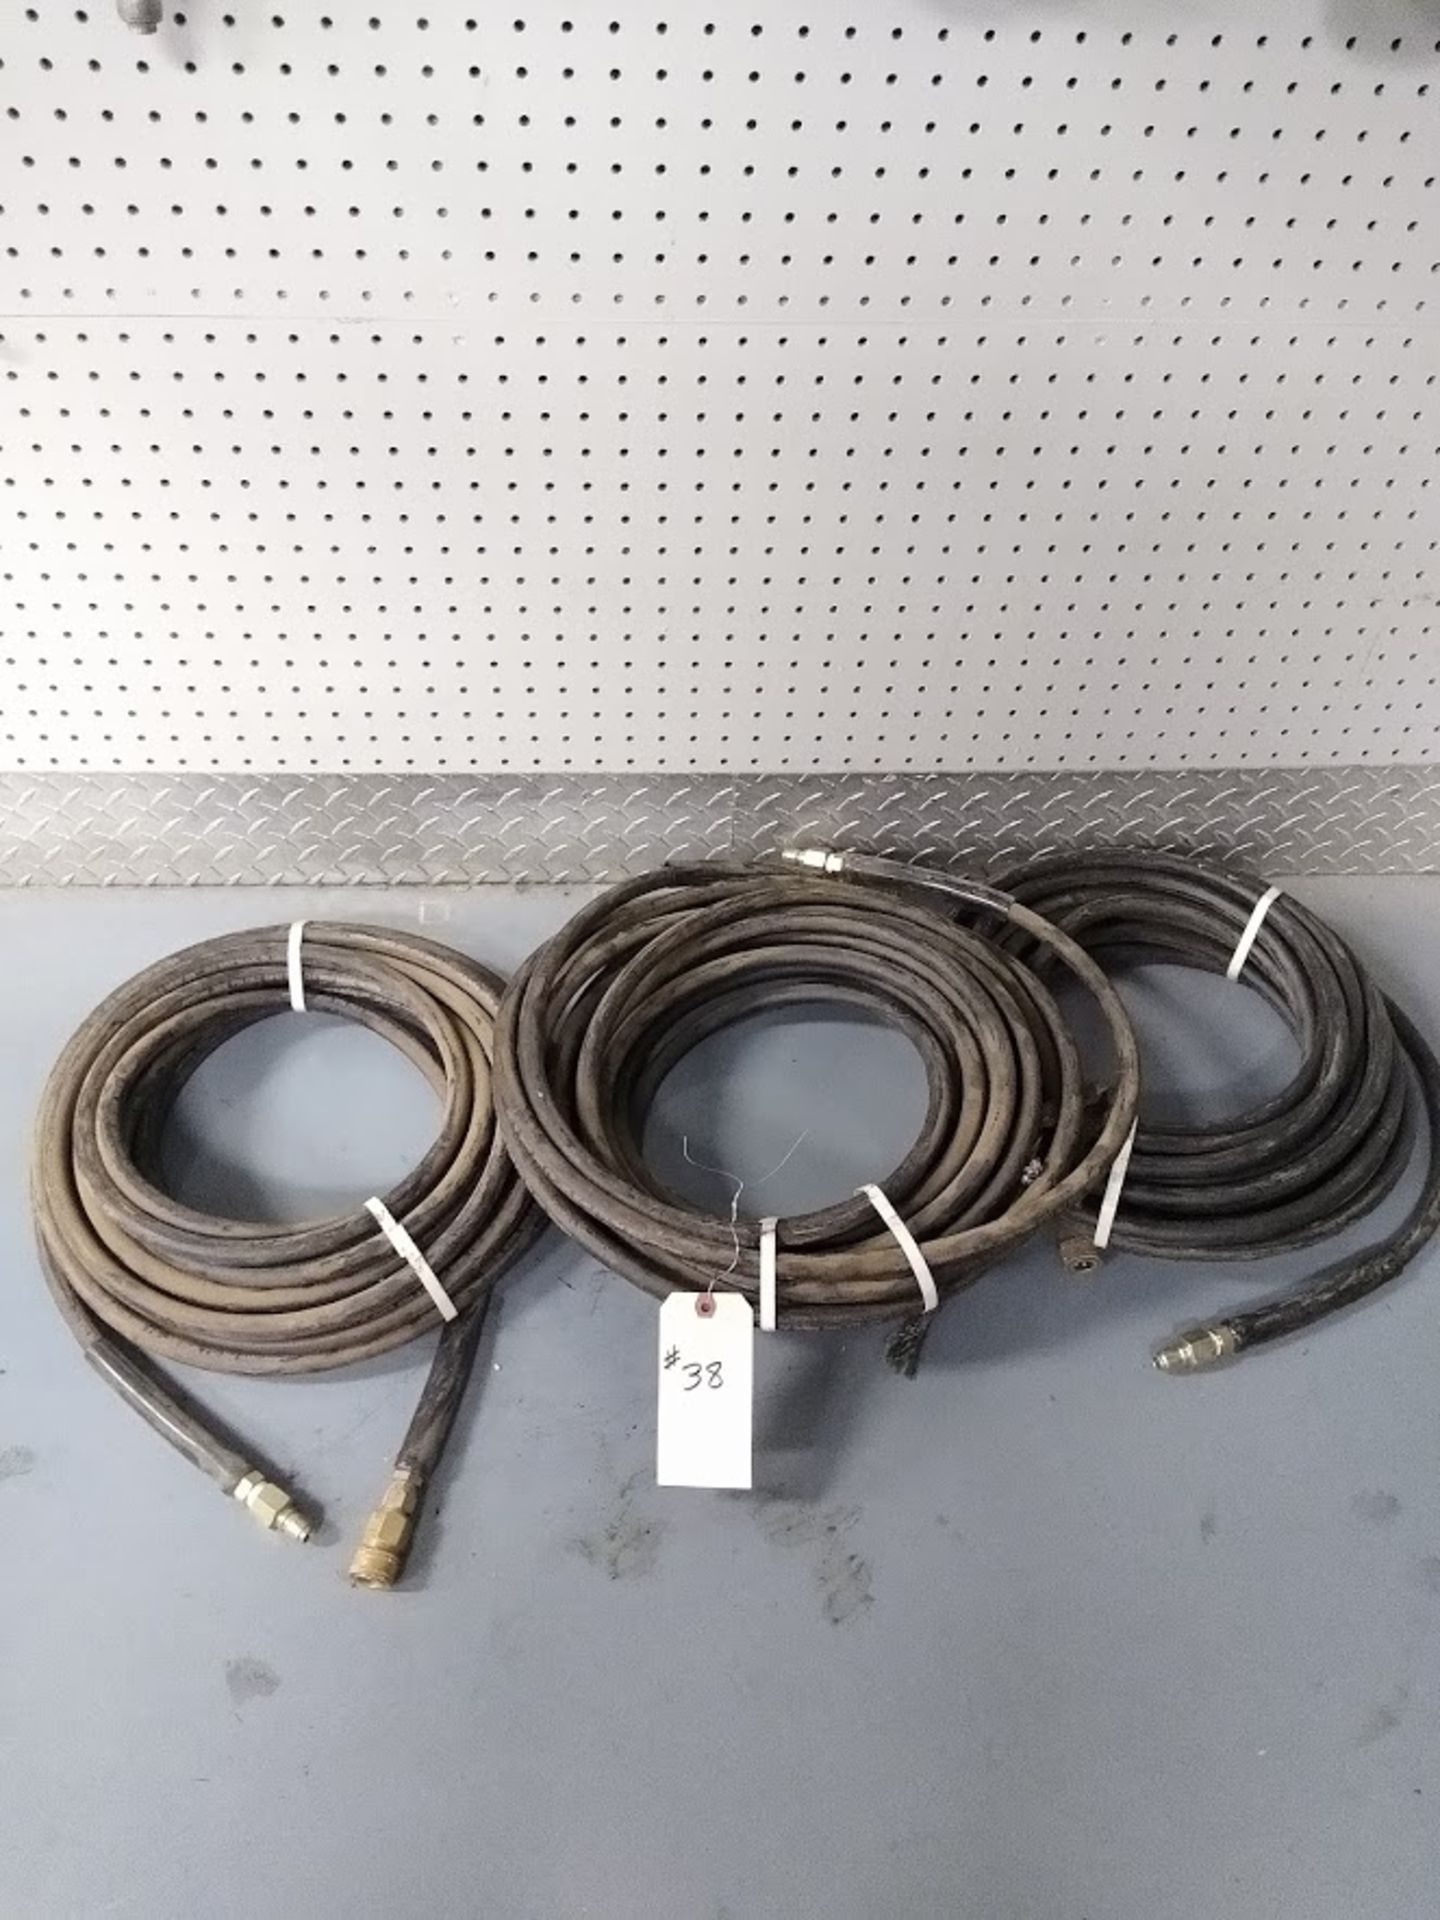 3 50' 3/8" 3000 PSI Pressure Washer Hose w/ Quick Disconnect Ends